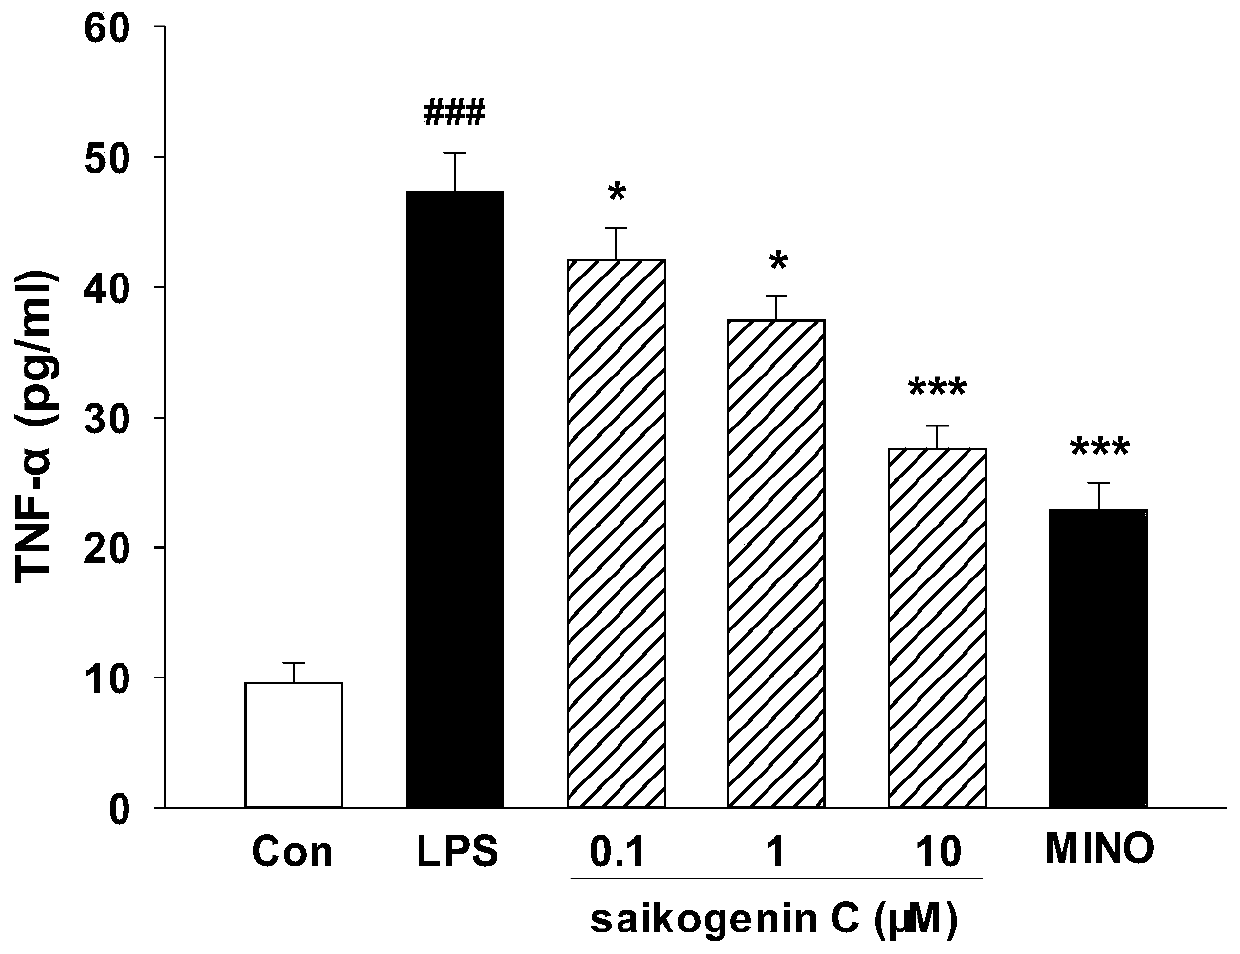 New application of saikosaponin C in inhibiting neuroinflammation